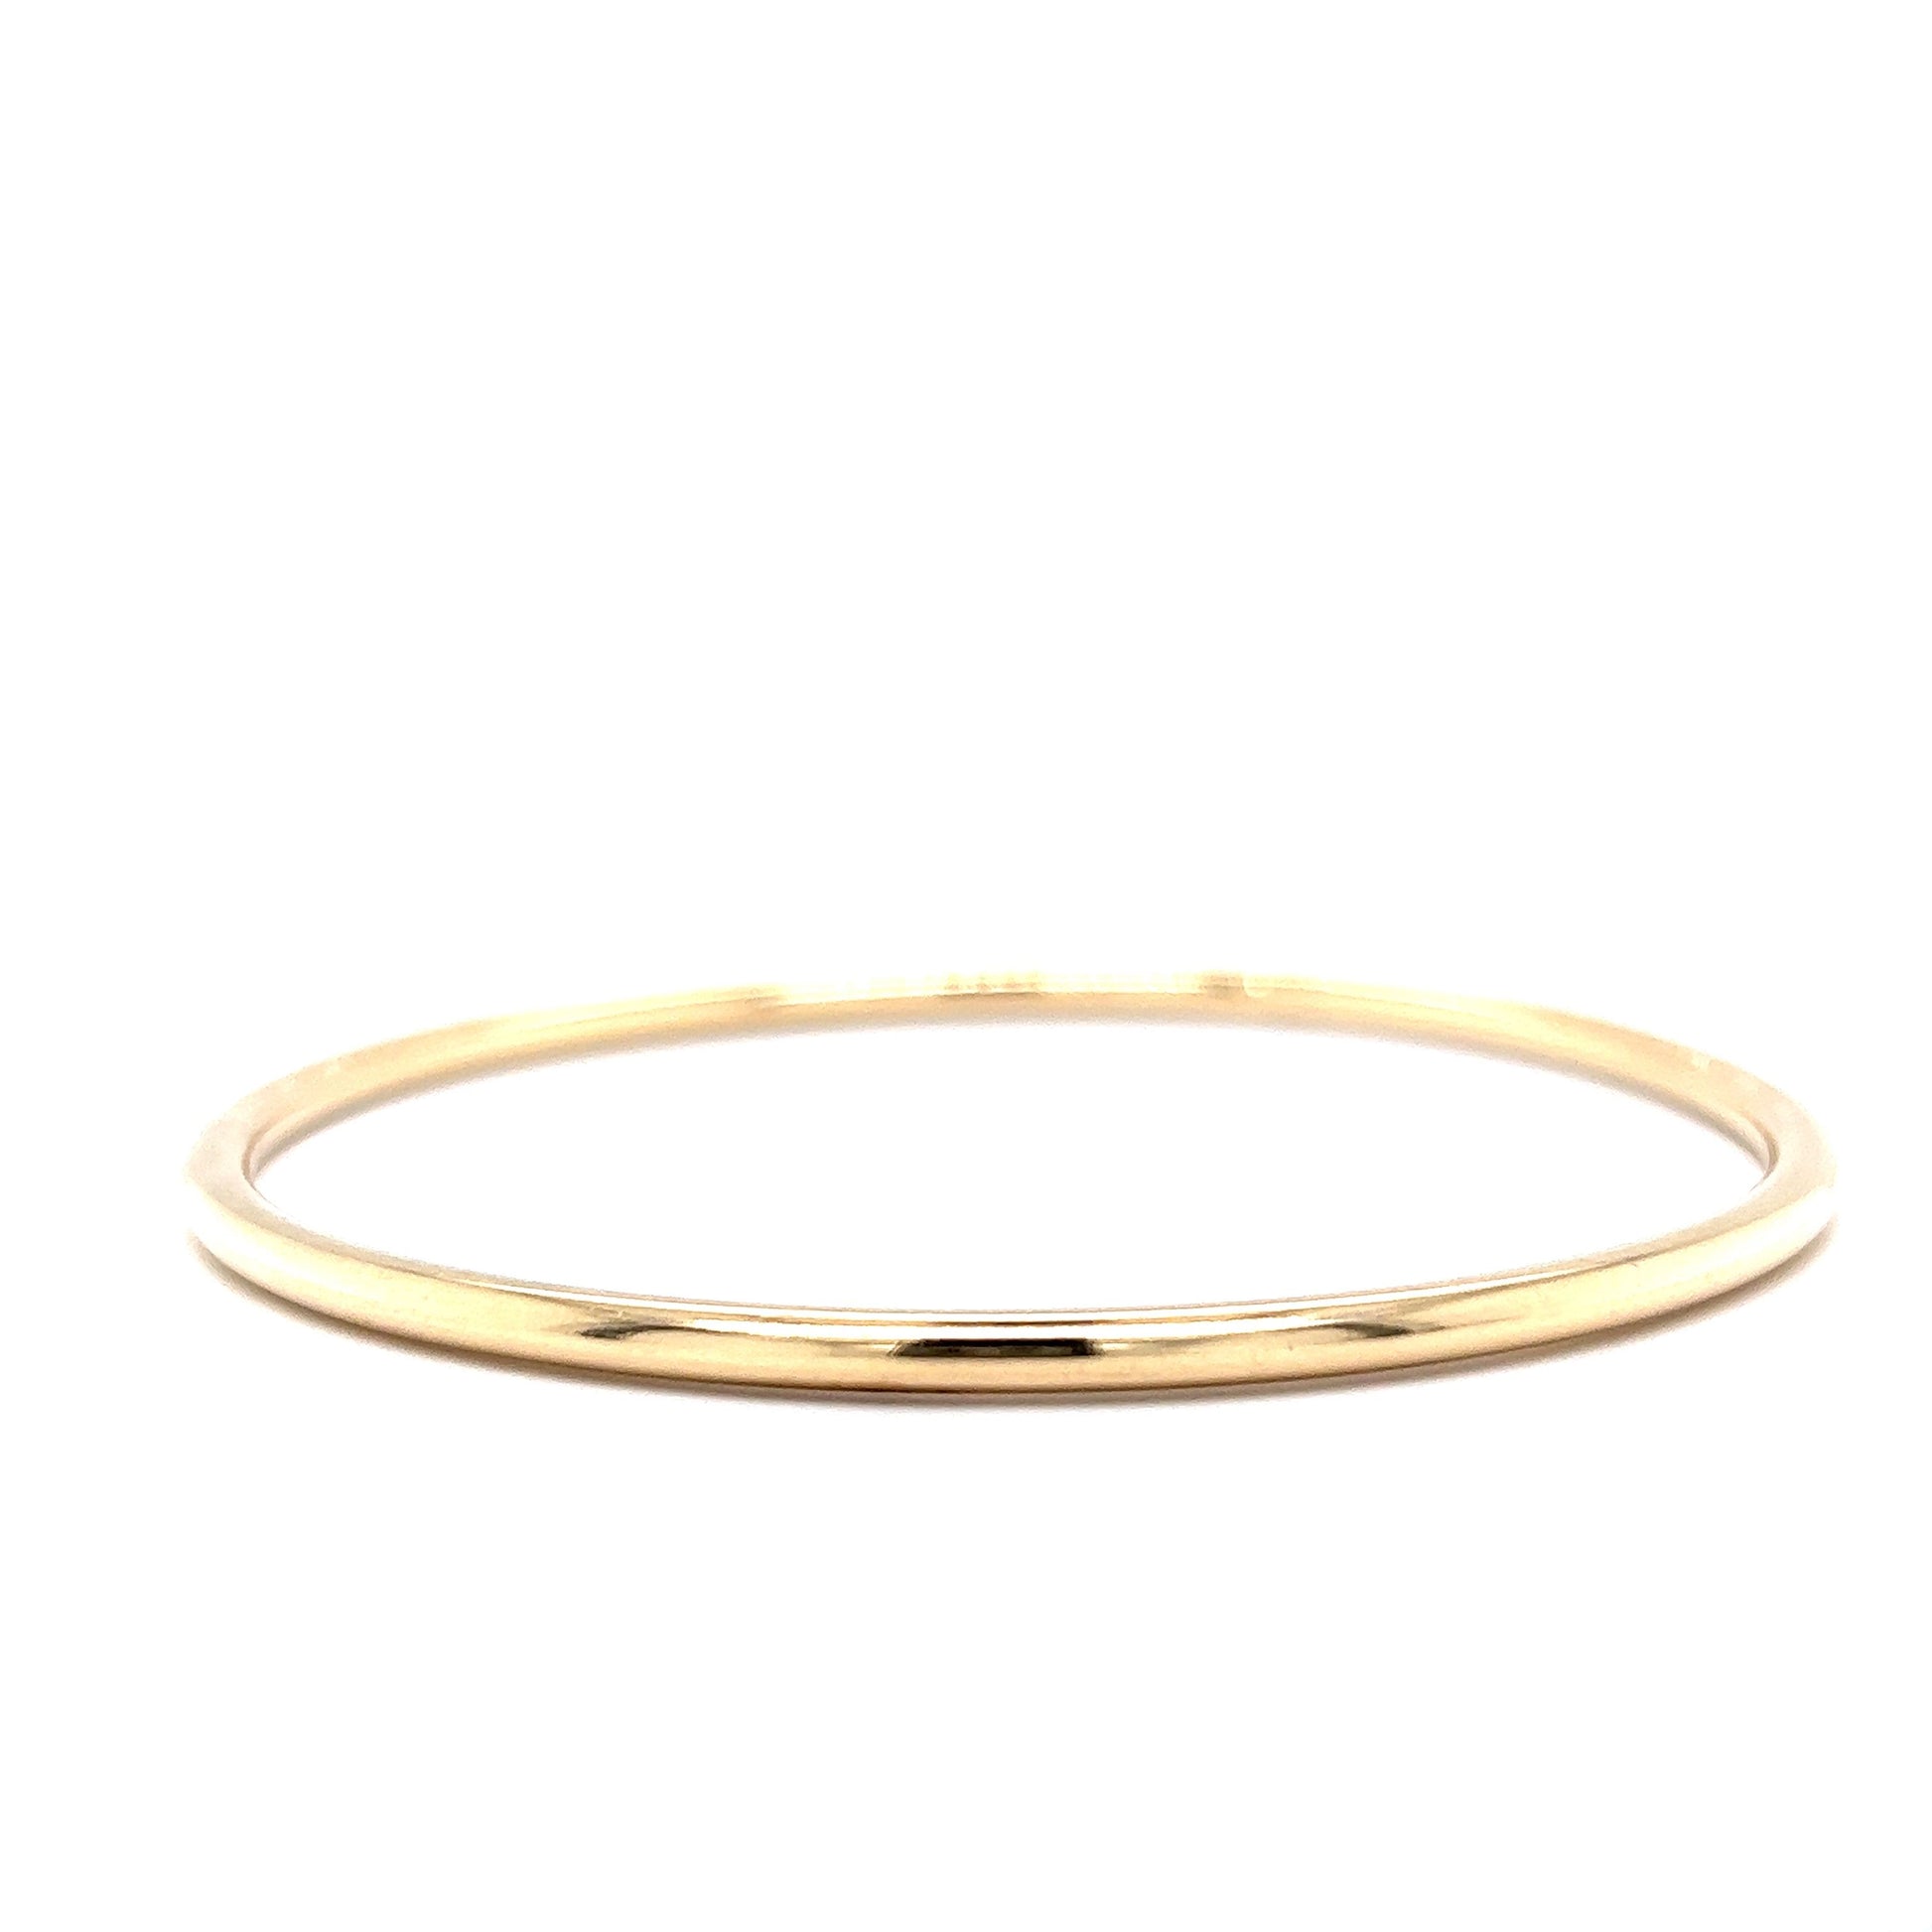 3mm Classic Round Bangle Bracelet in 14k Yellow Gold